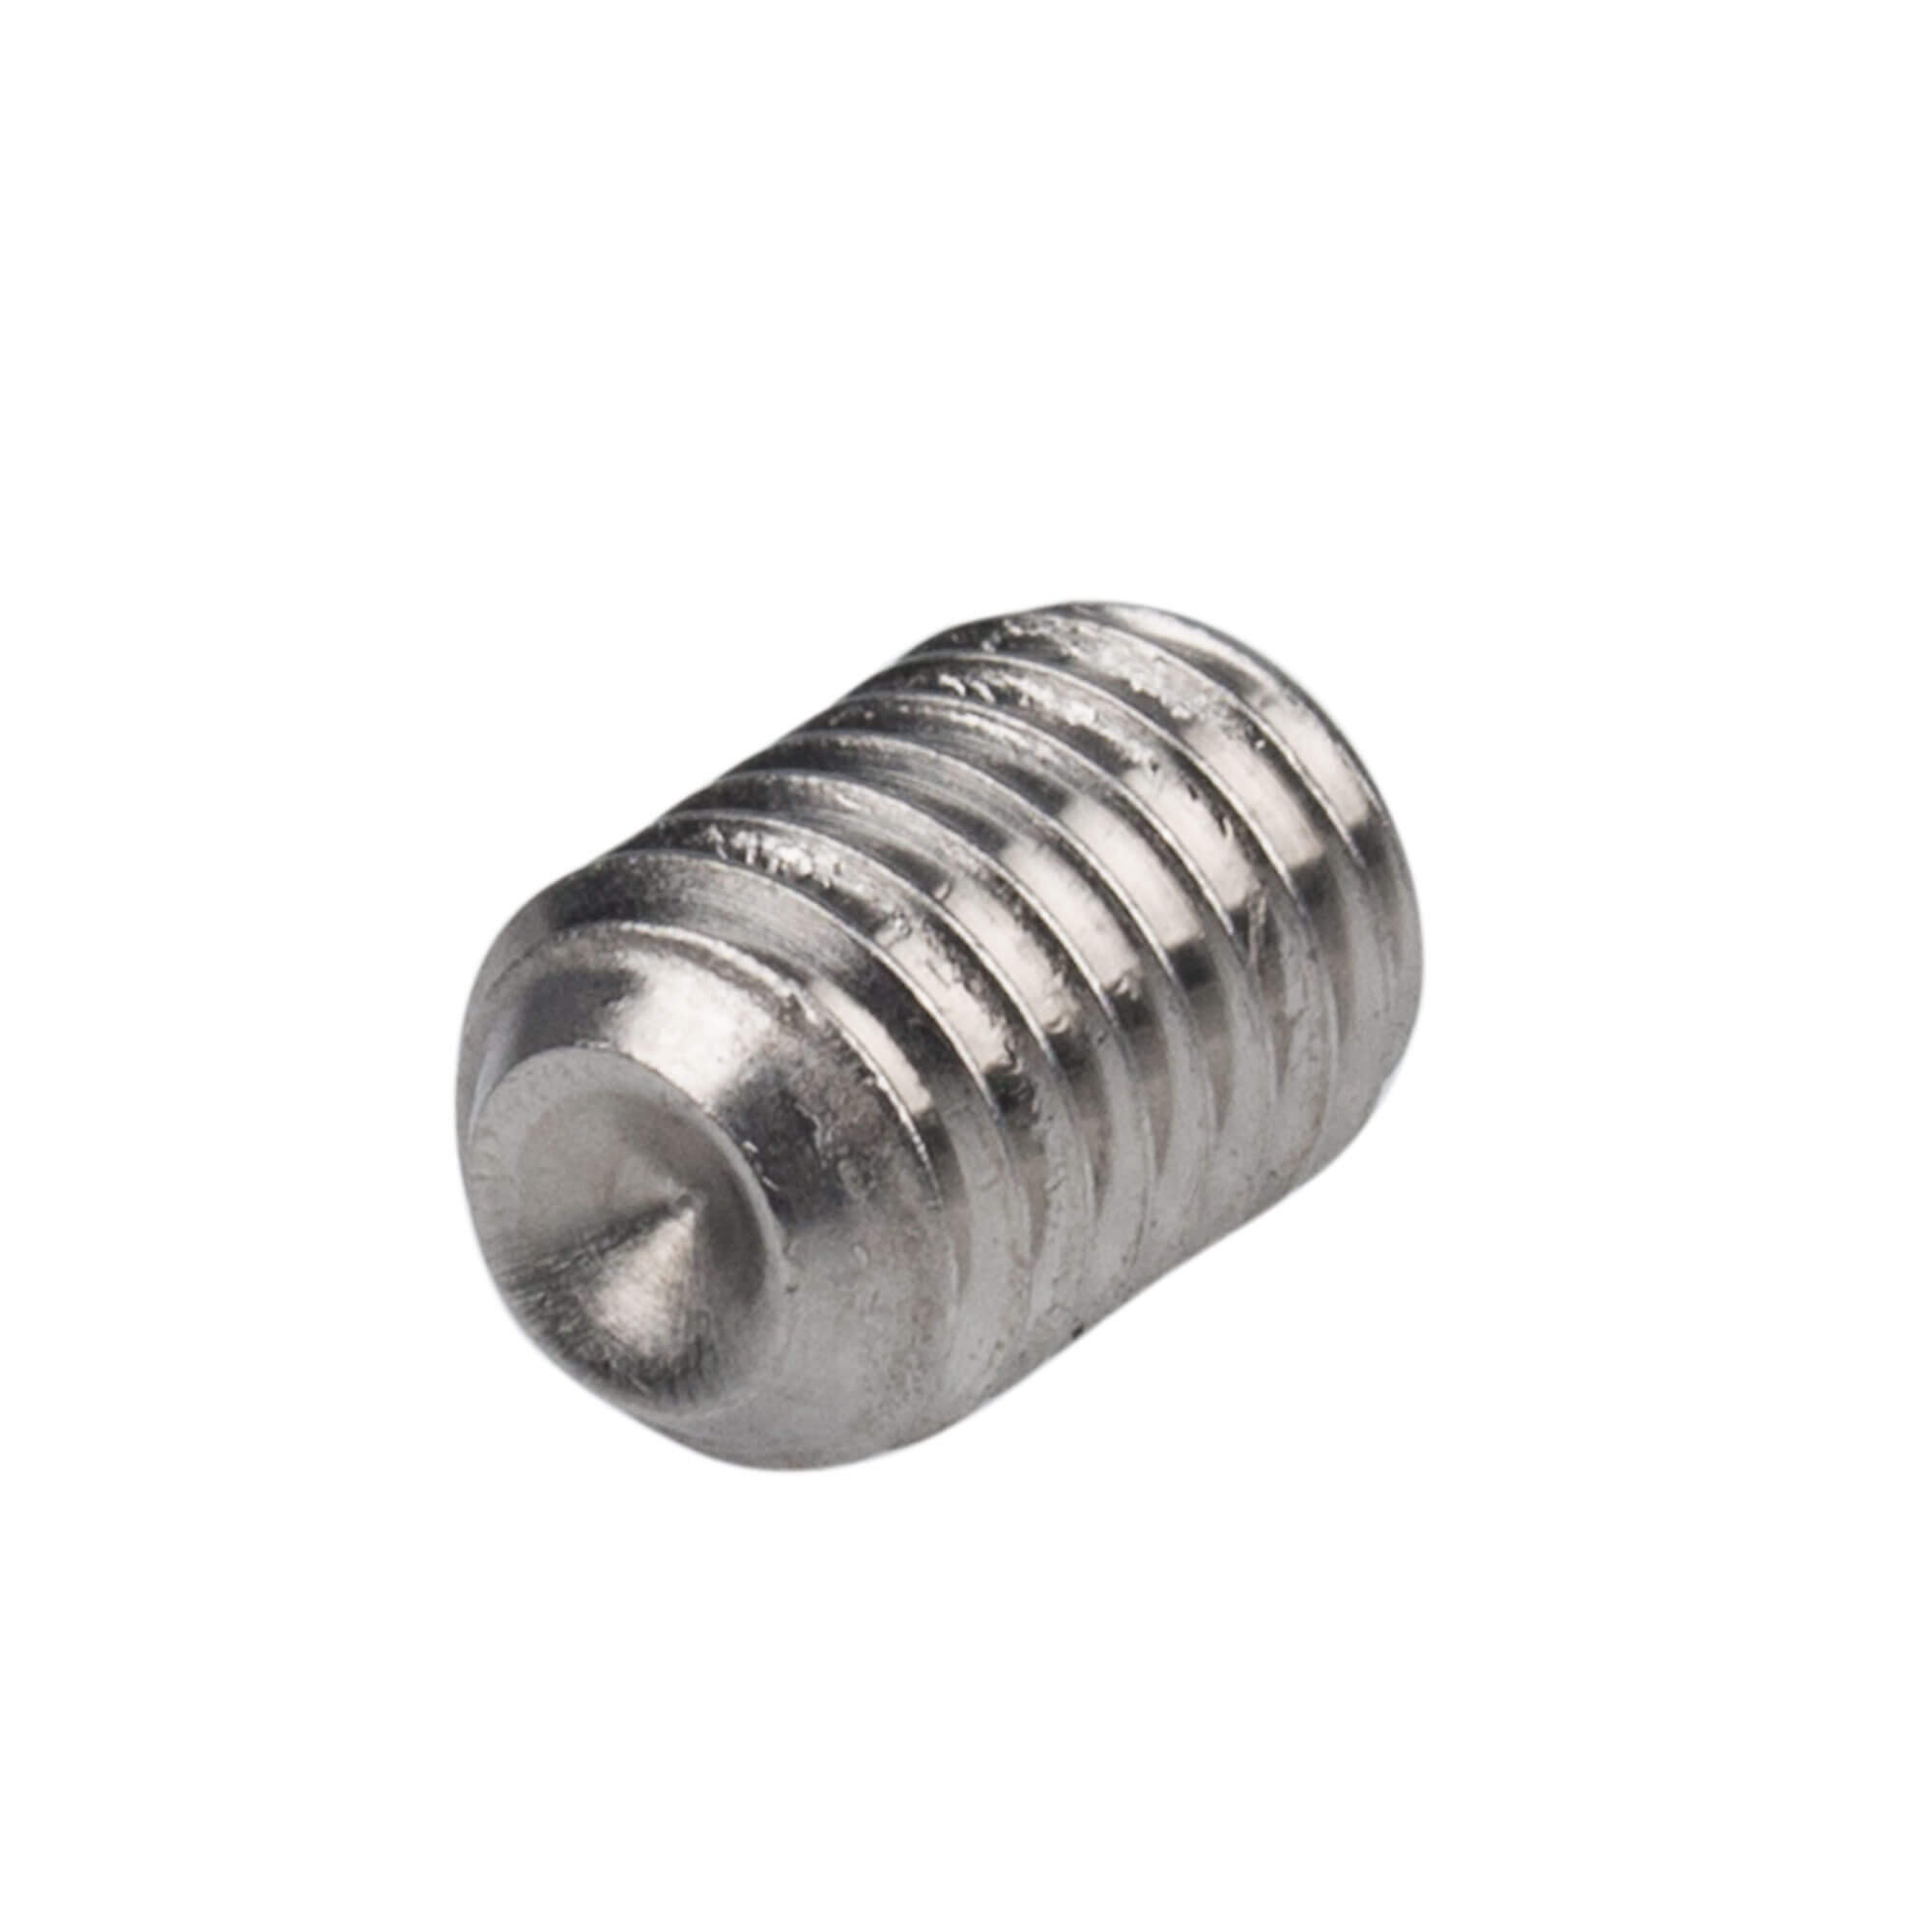 M10x14 setscrew - spare part for Cancan manual juicer